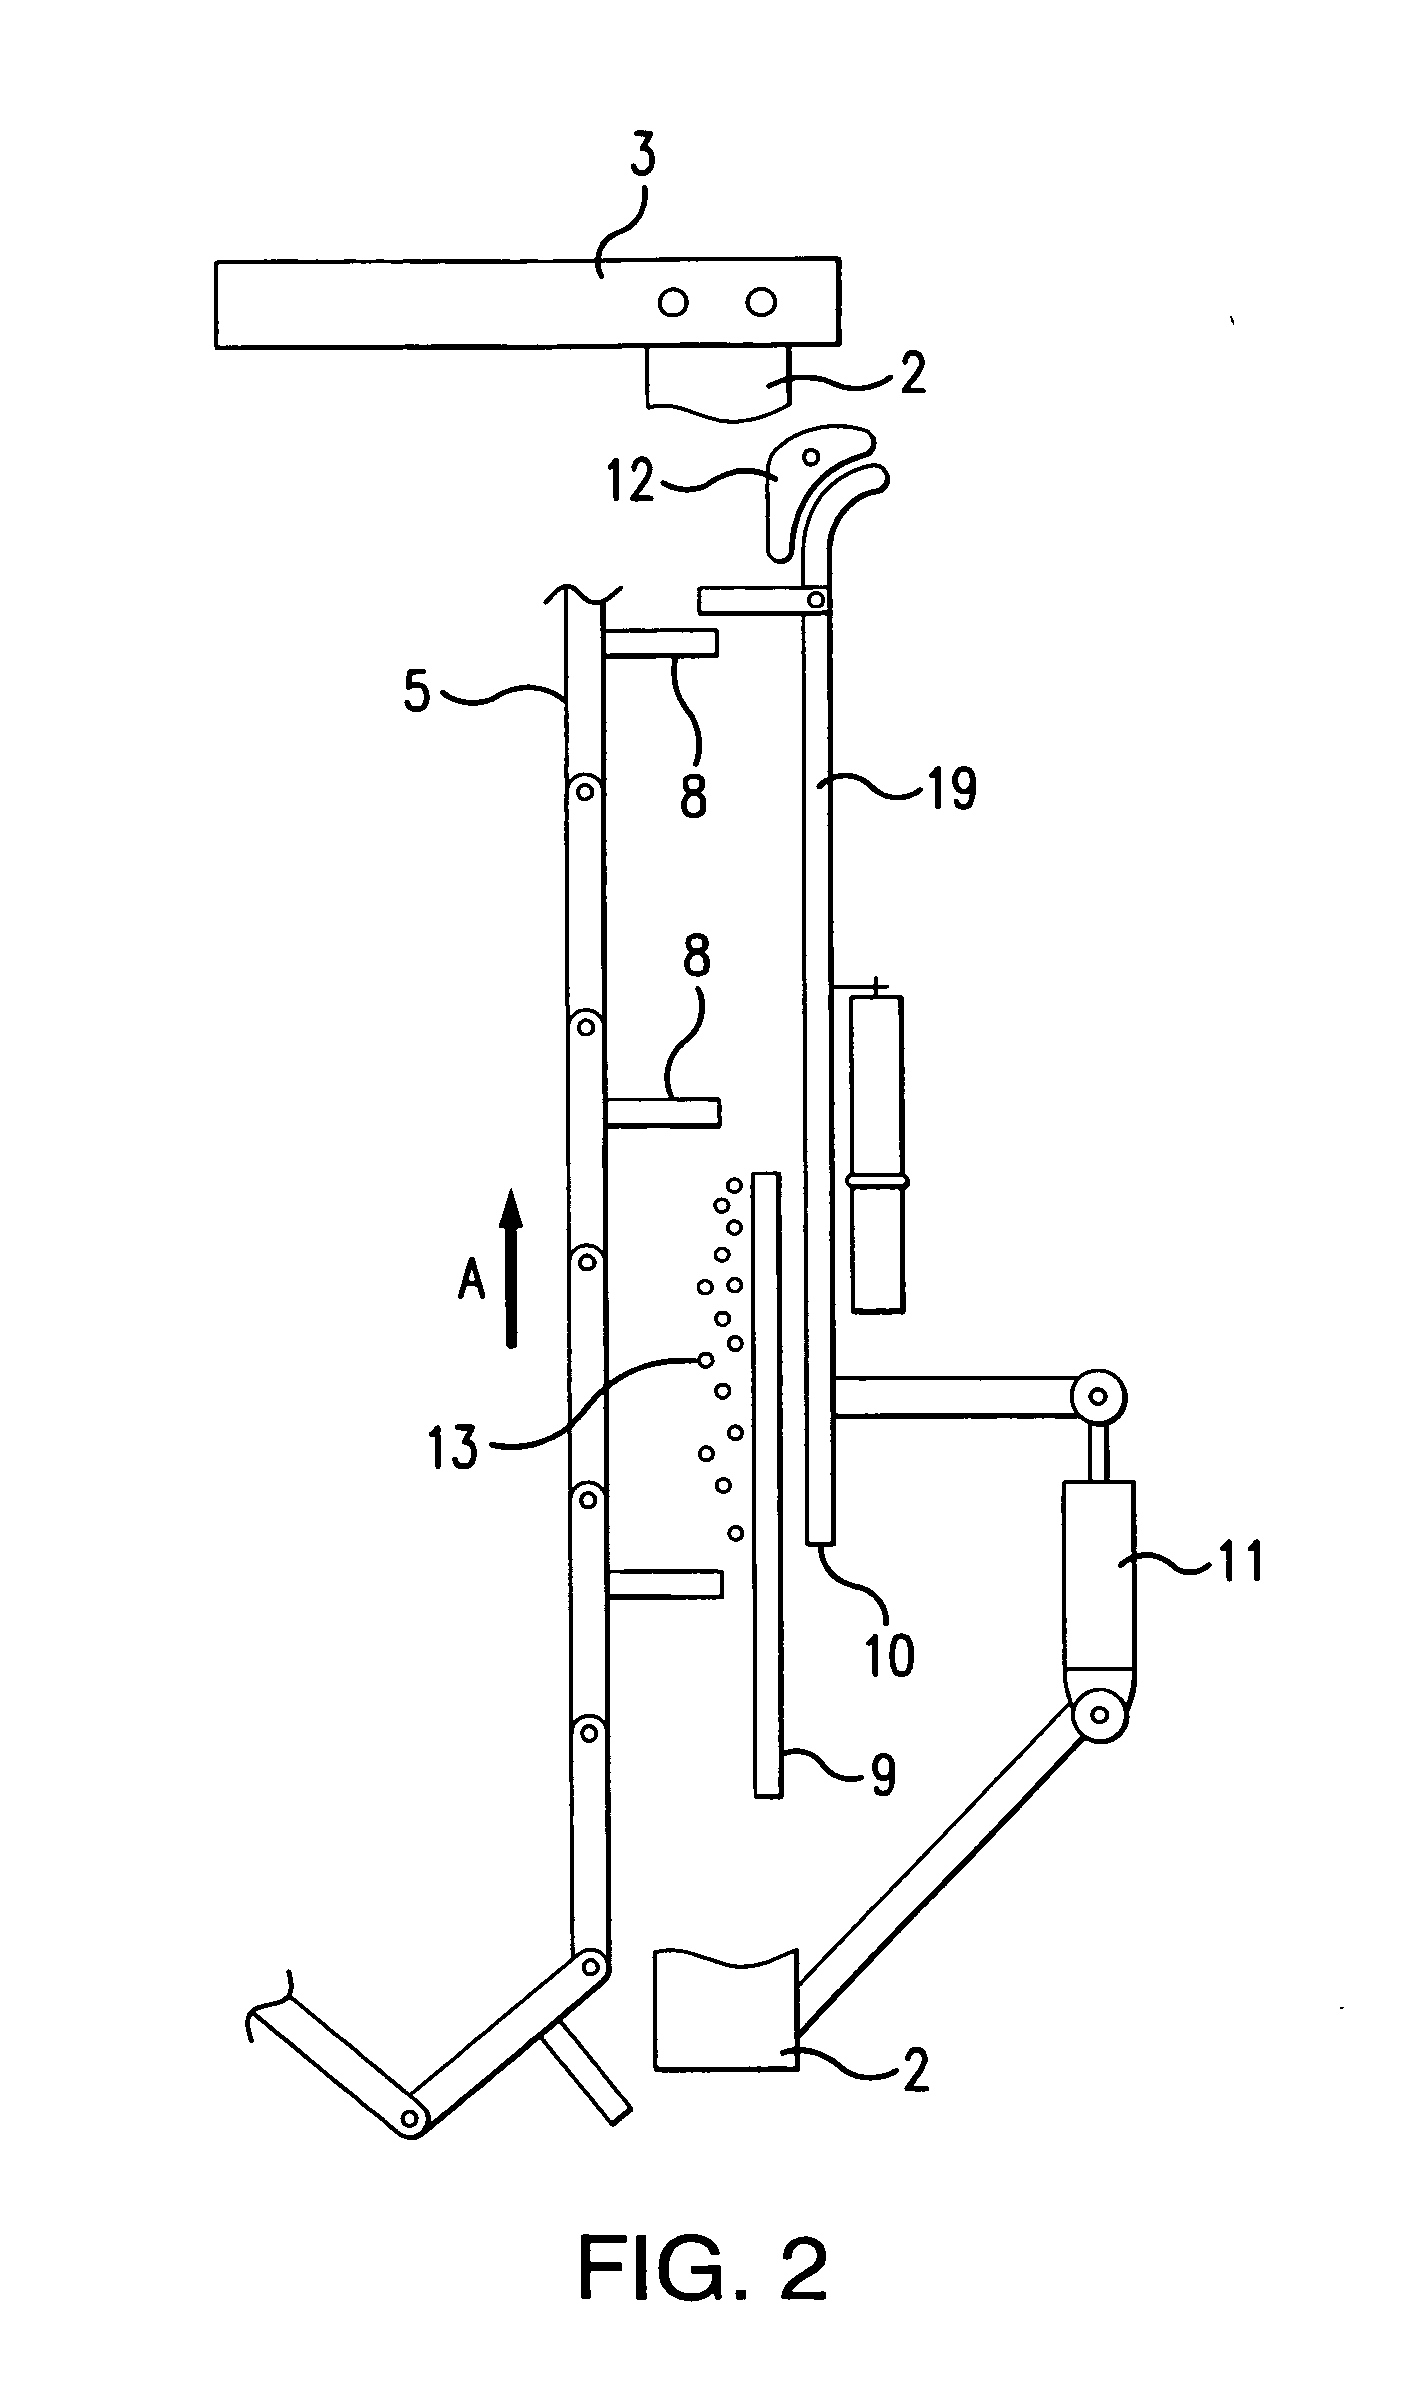 Thin plate apparatus for removing debris from water